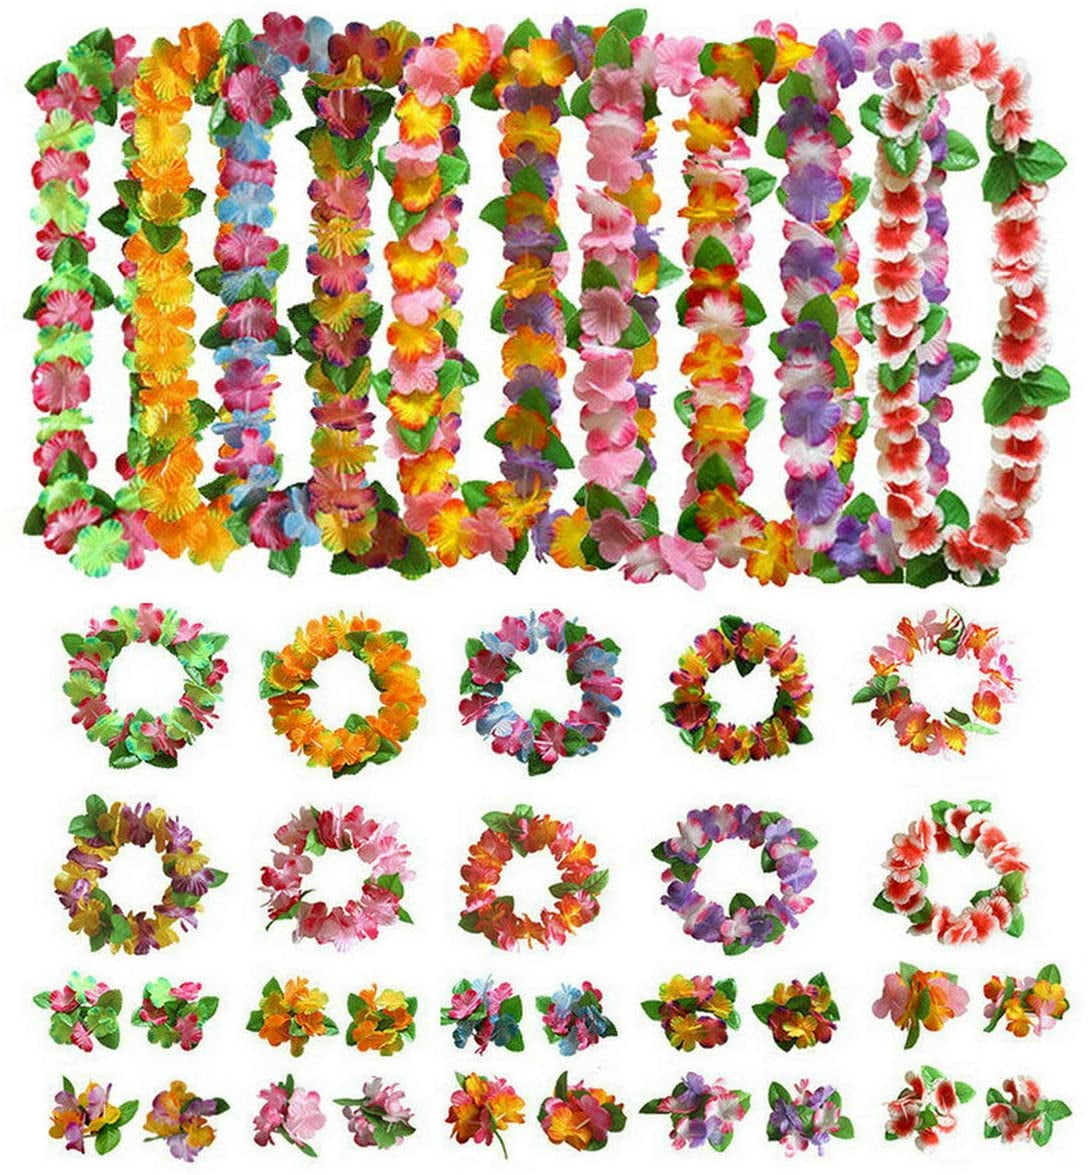 12pcs Hawaiian Lei Leis Flower Necklace Garland For Tropical Holiday Beach Party